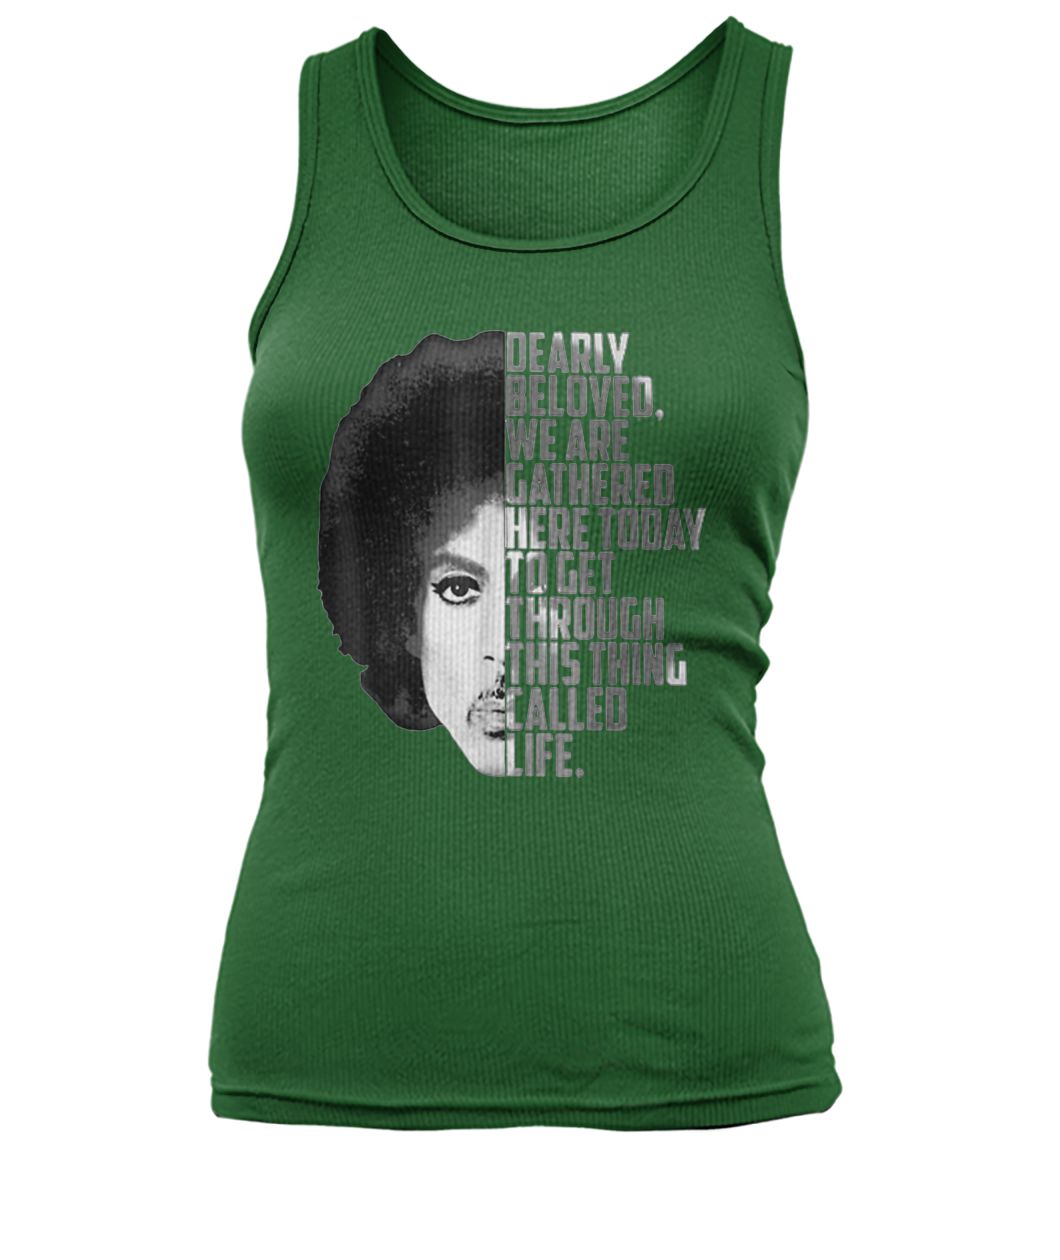 Dearly beloved we are gathered here today to get through this thing called life women's tank top